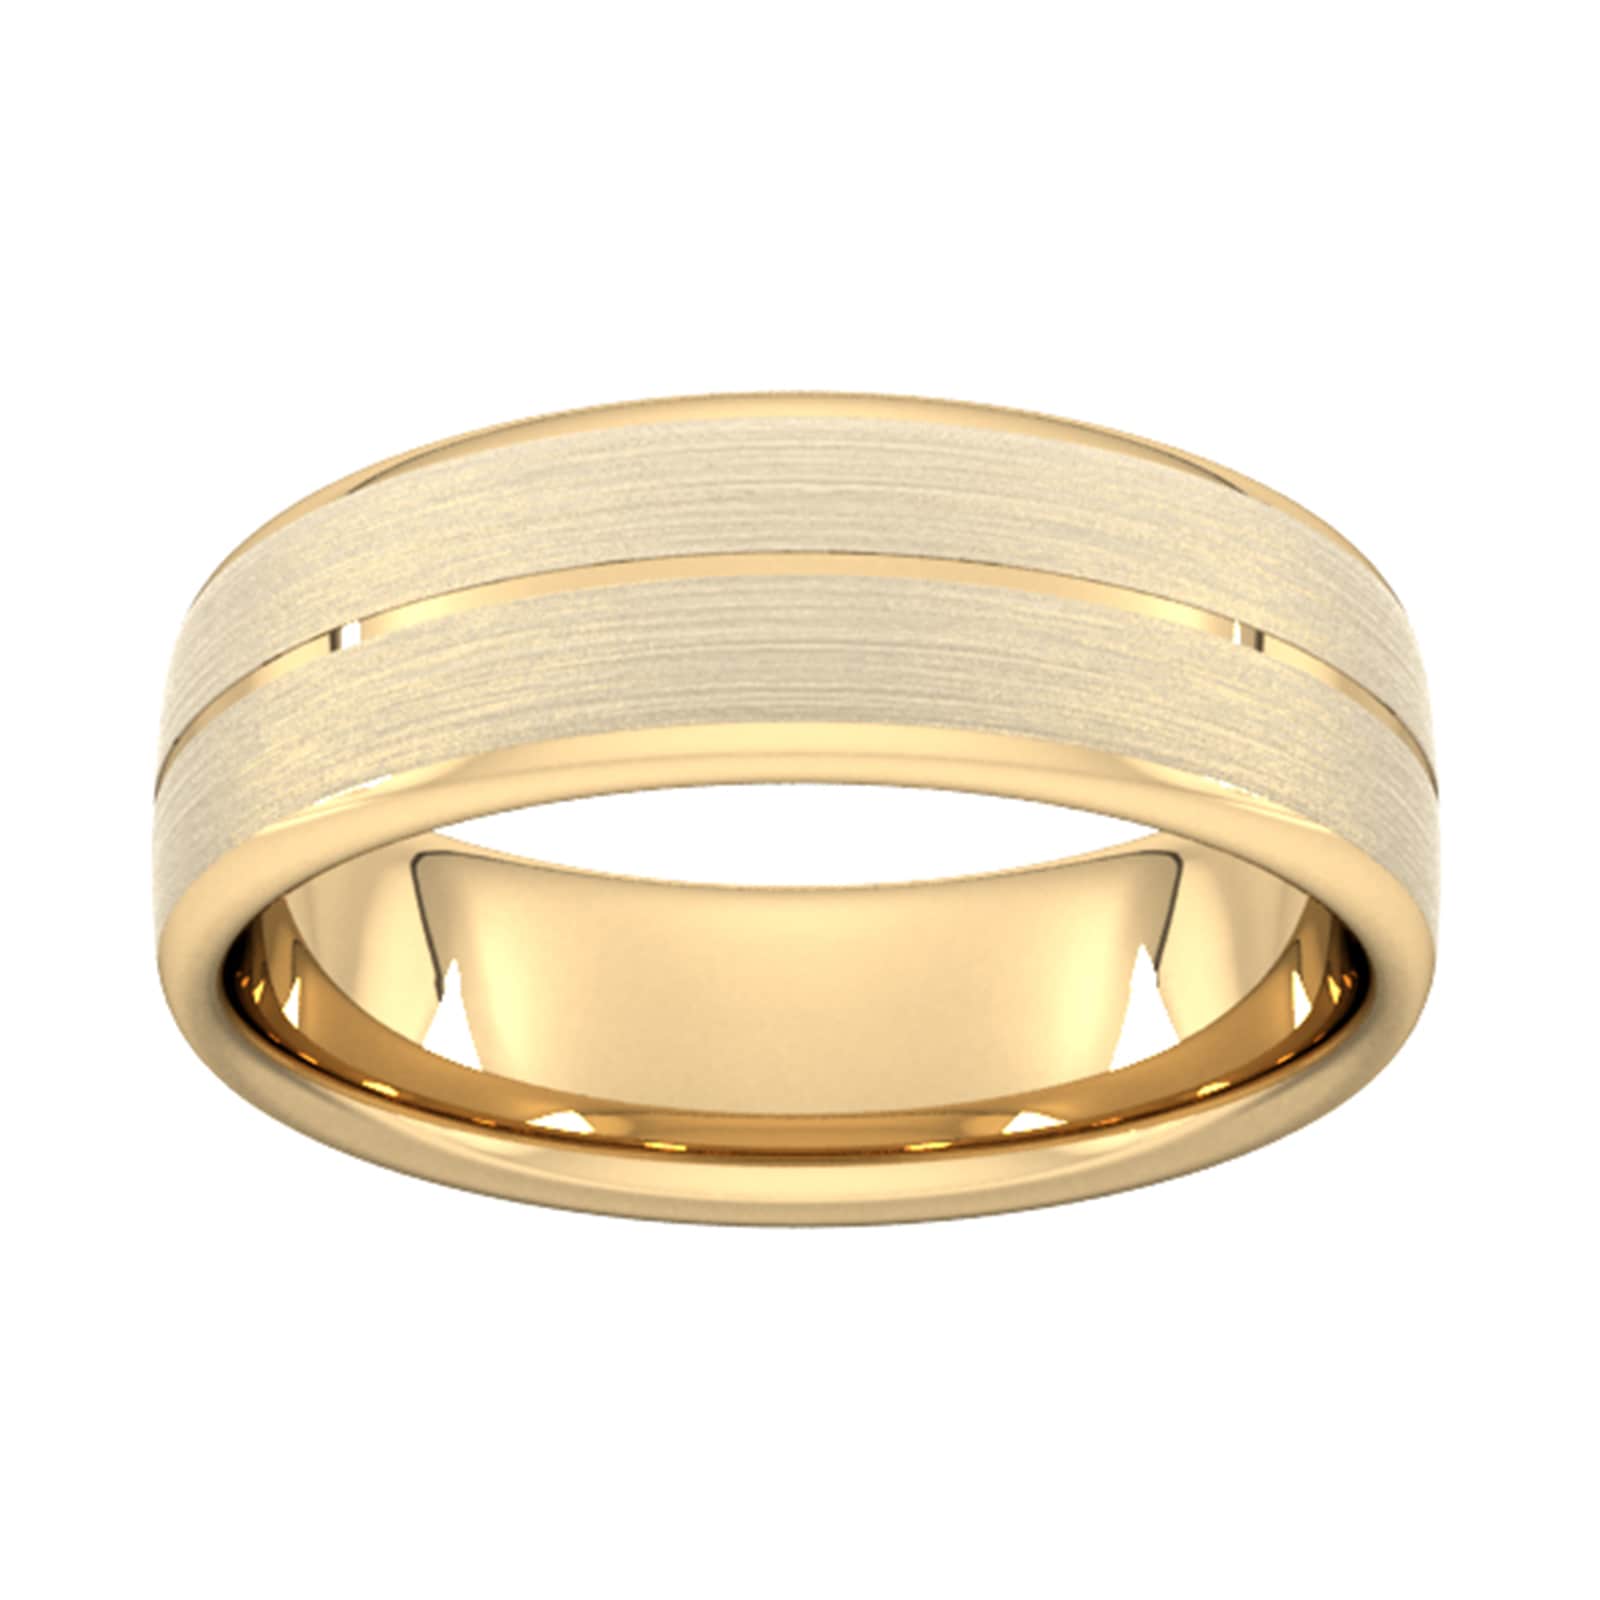 7mm Slight Court Heavy Centre Groove With Chamfered Edge Wedding Ring In 18 Carat Yellow Gold - Ring Size S